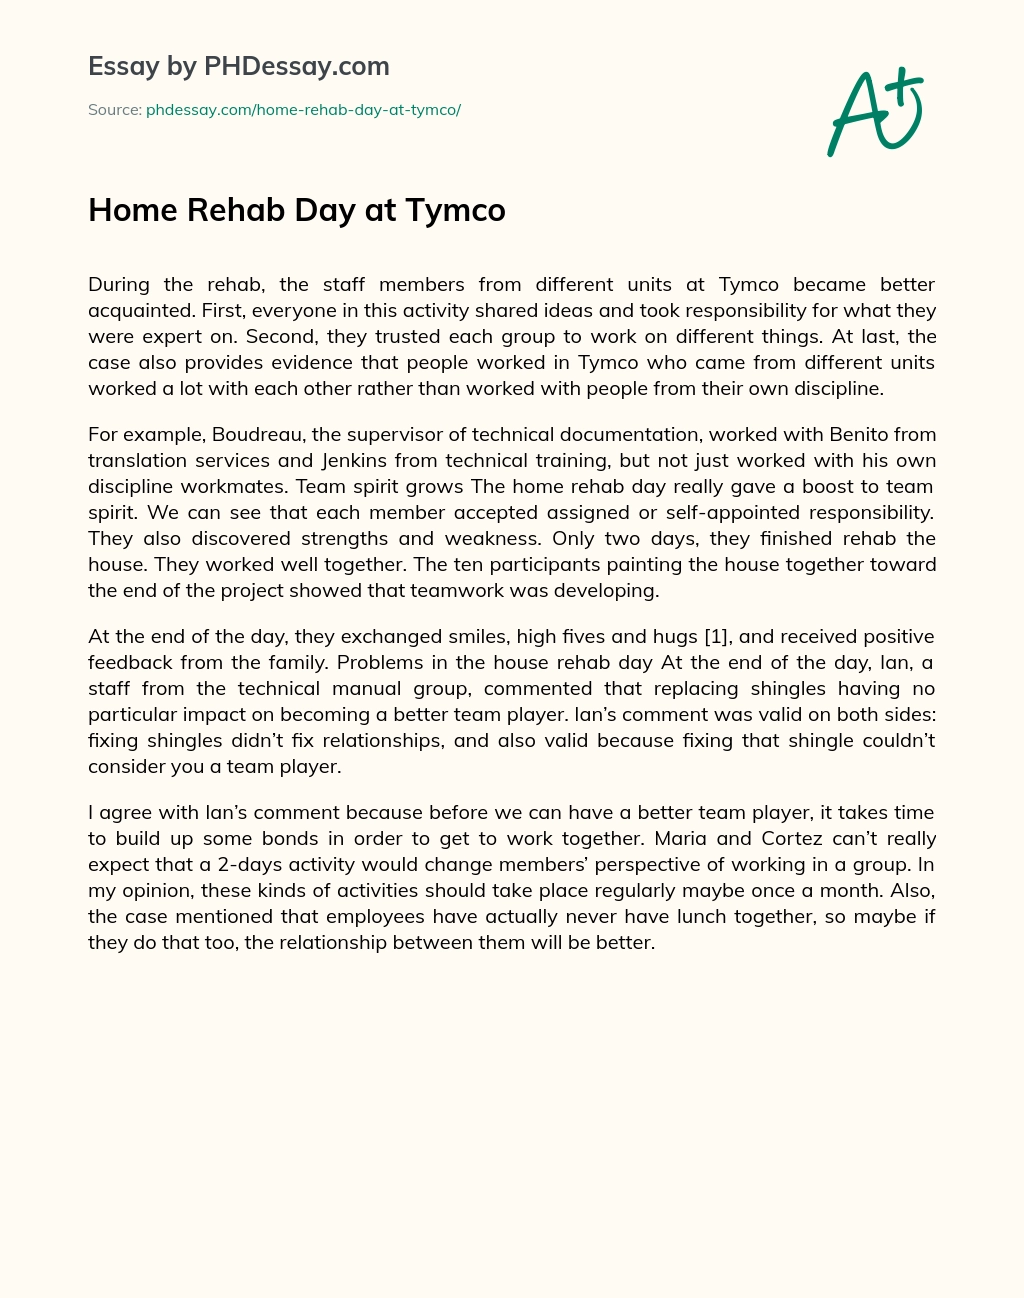 Home Rehab Day at Tymco essay